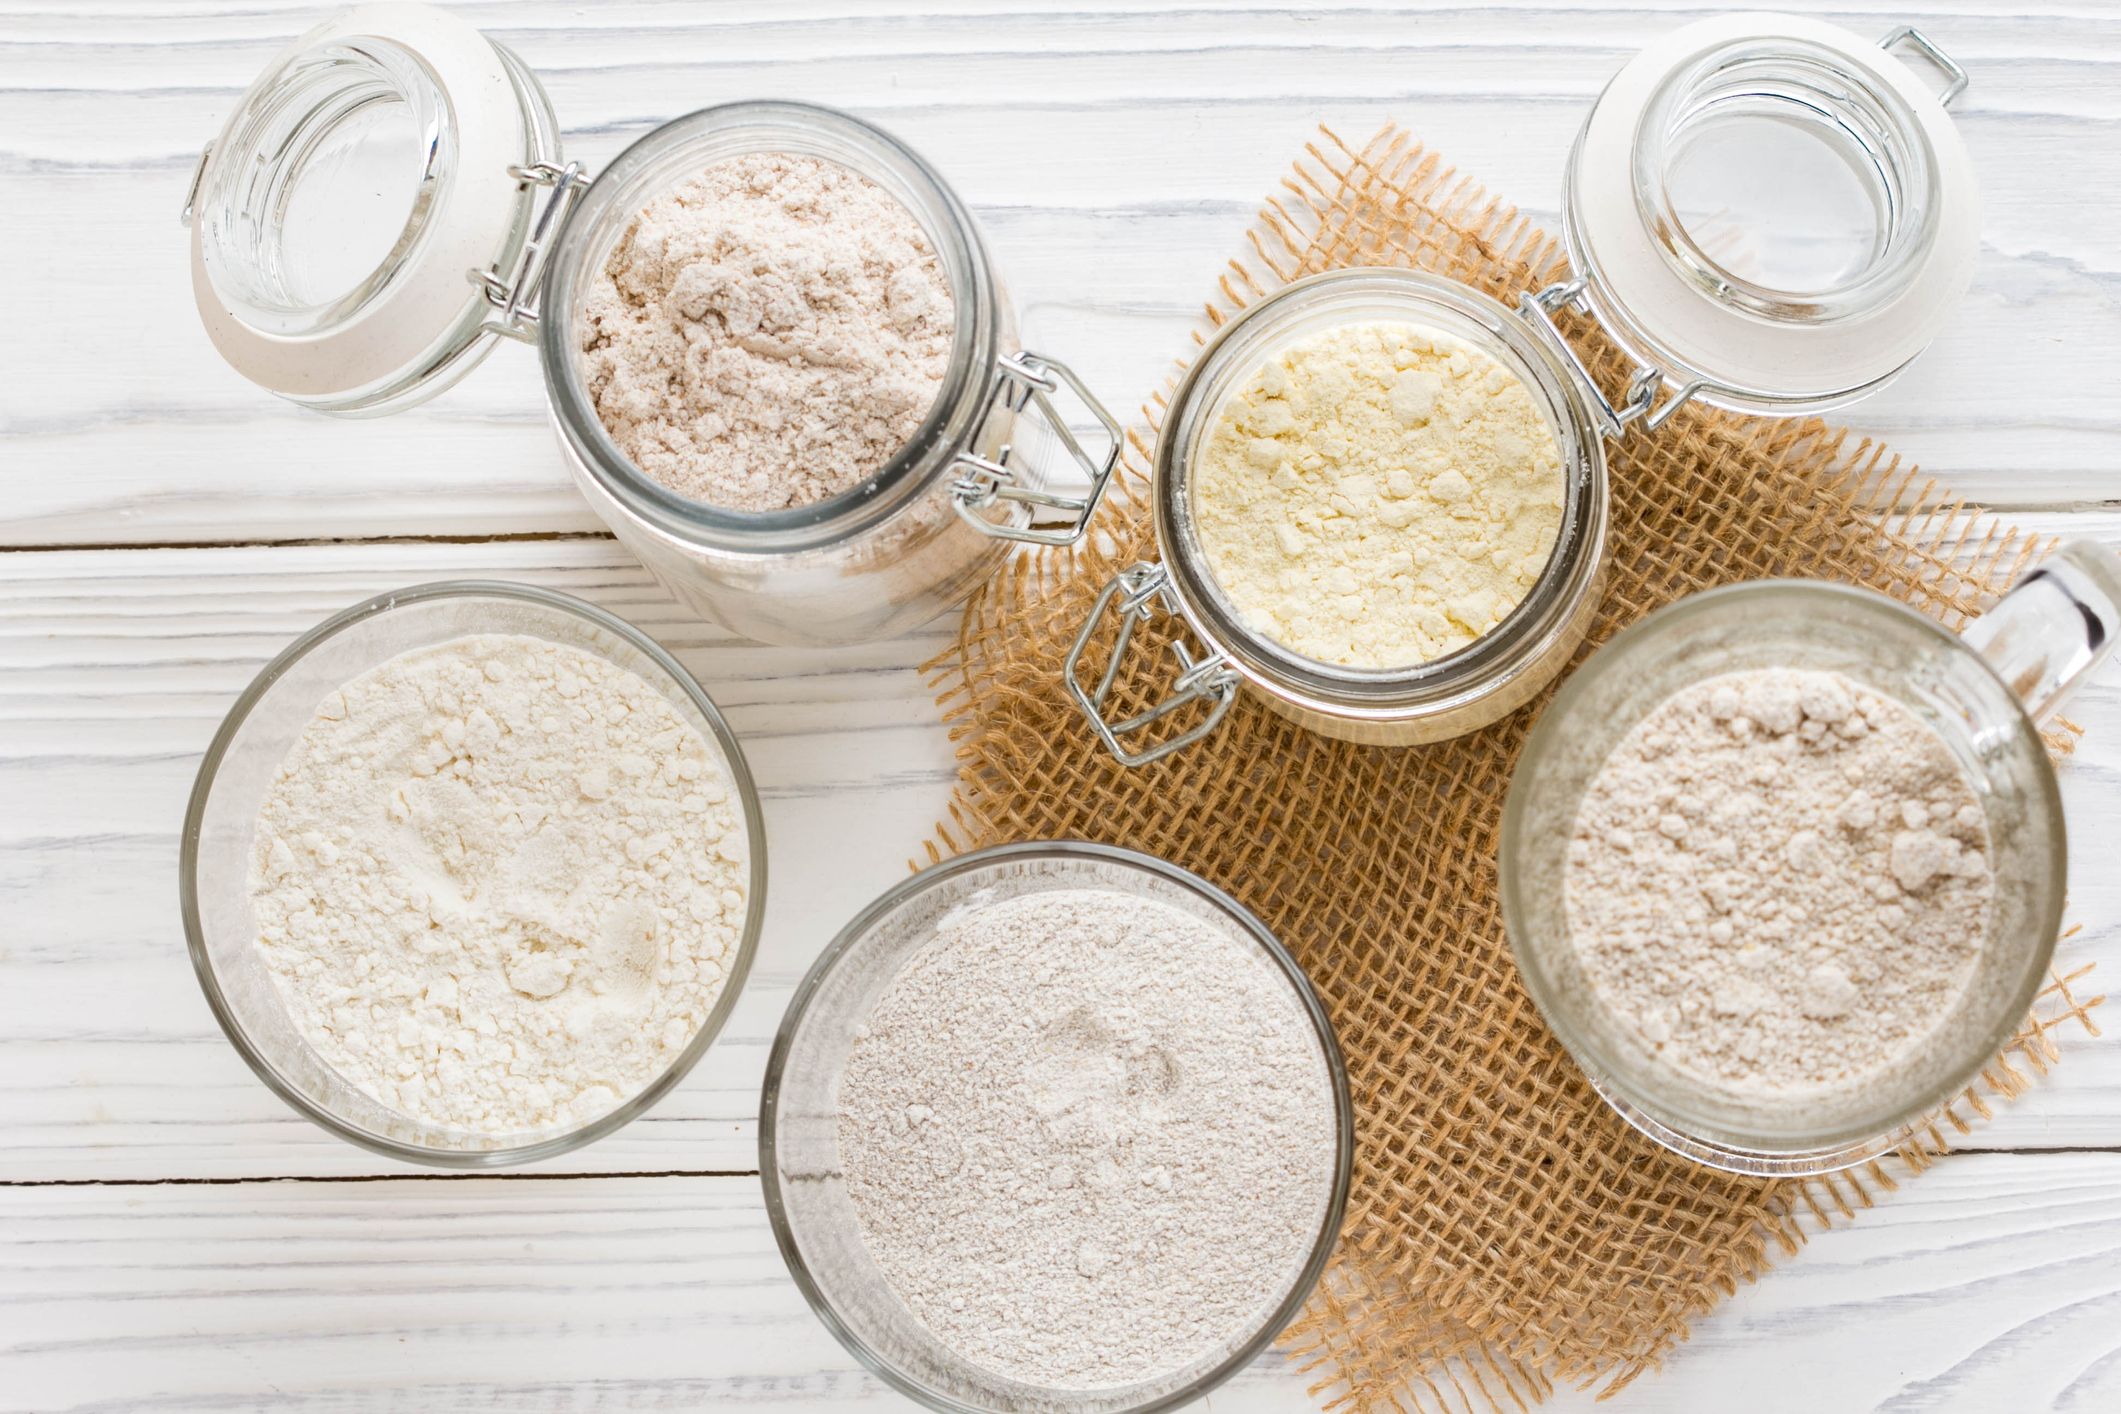 10 Types of Flour - Different Types of Flour for Baking